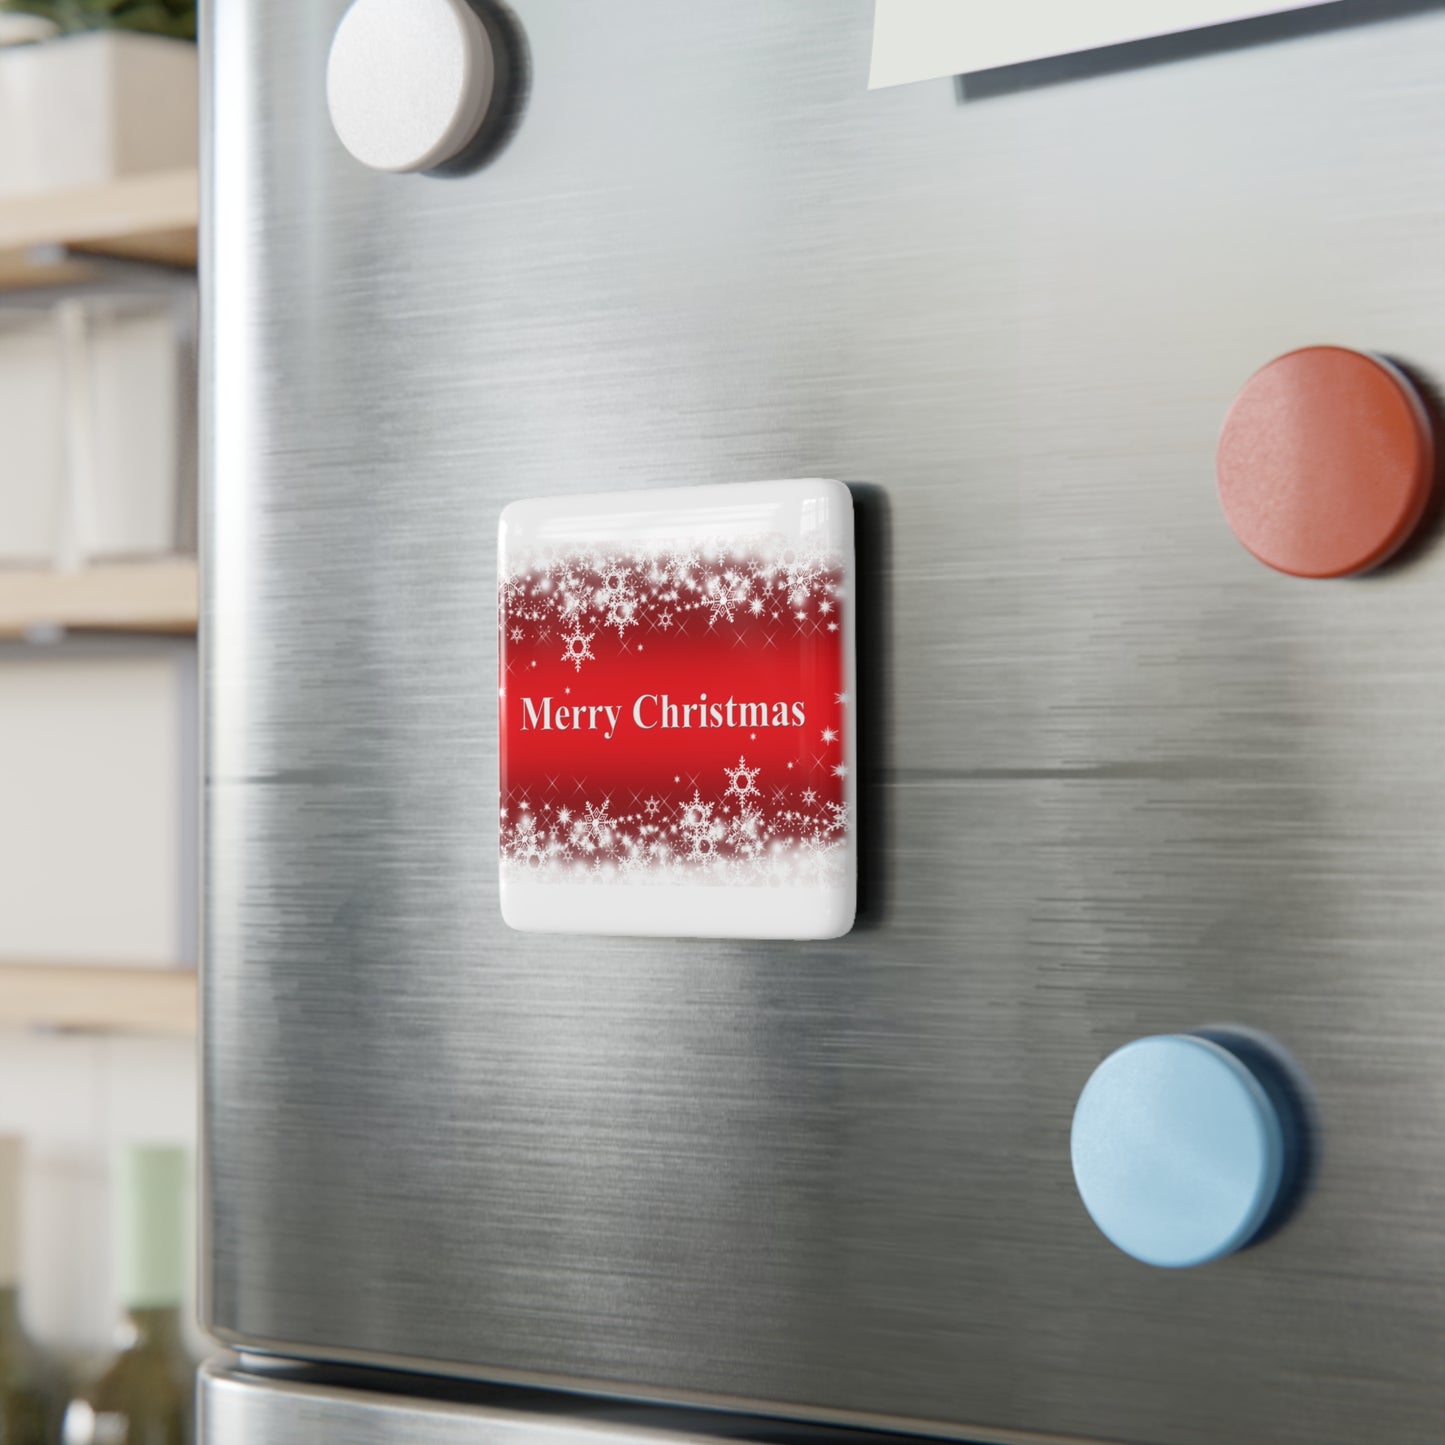 "Merry Christmas" Porcelain Magnet, Square, Glossy Finish